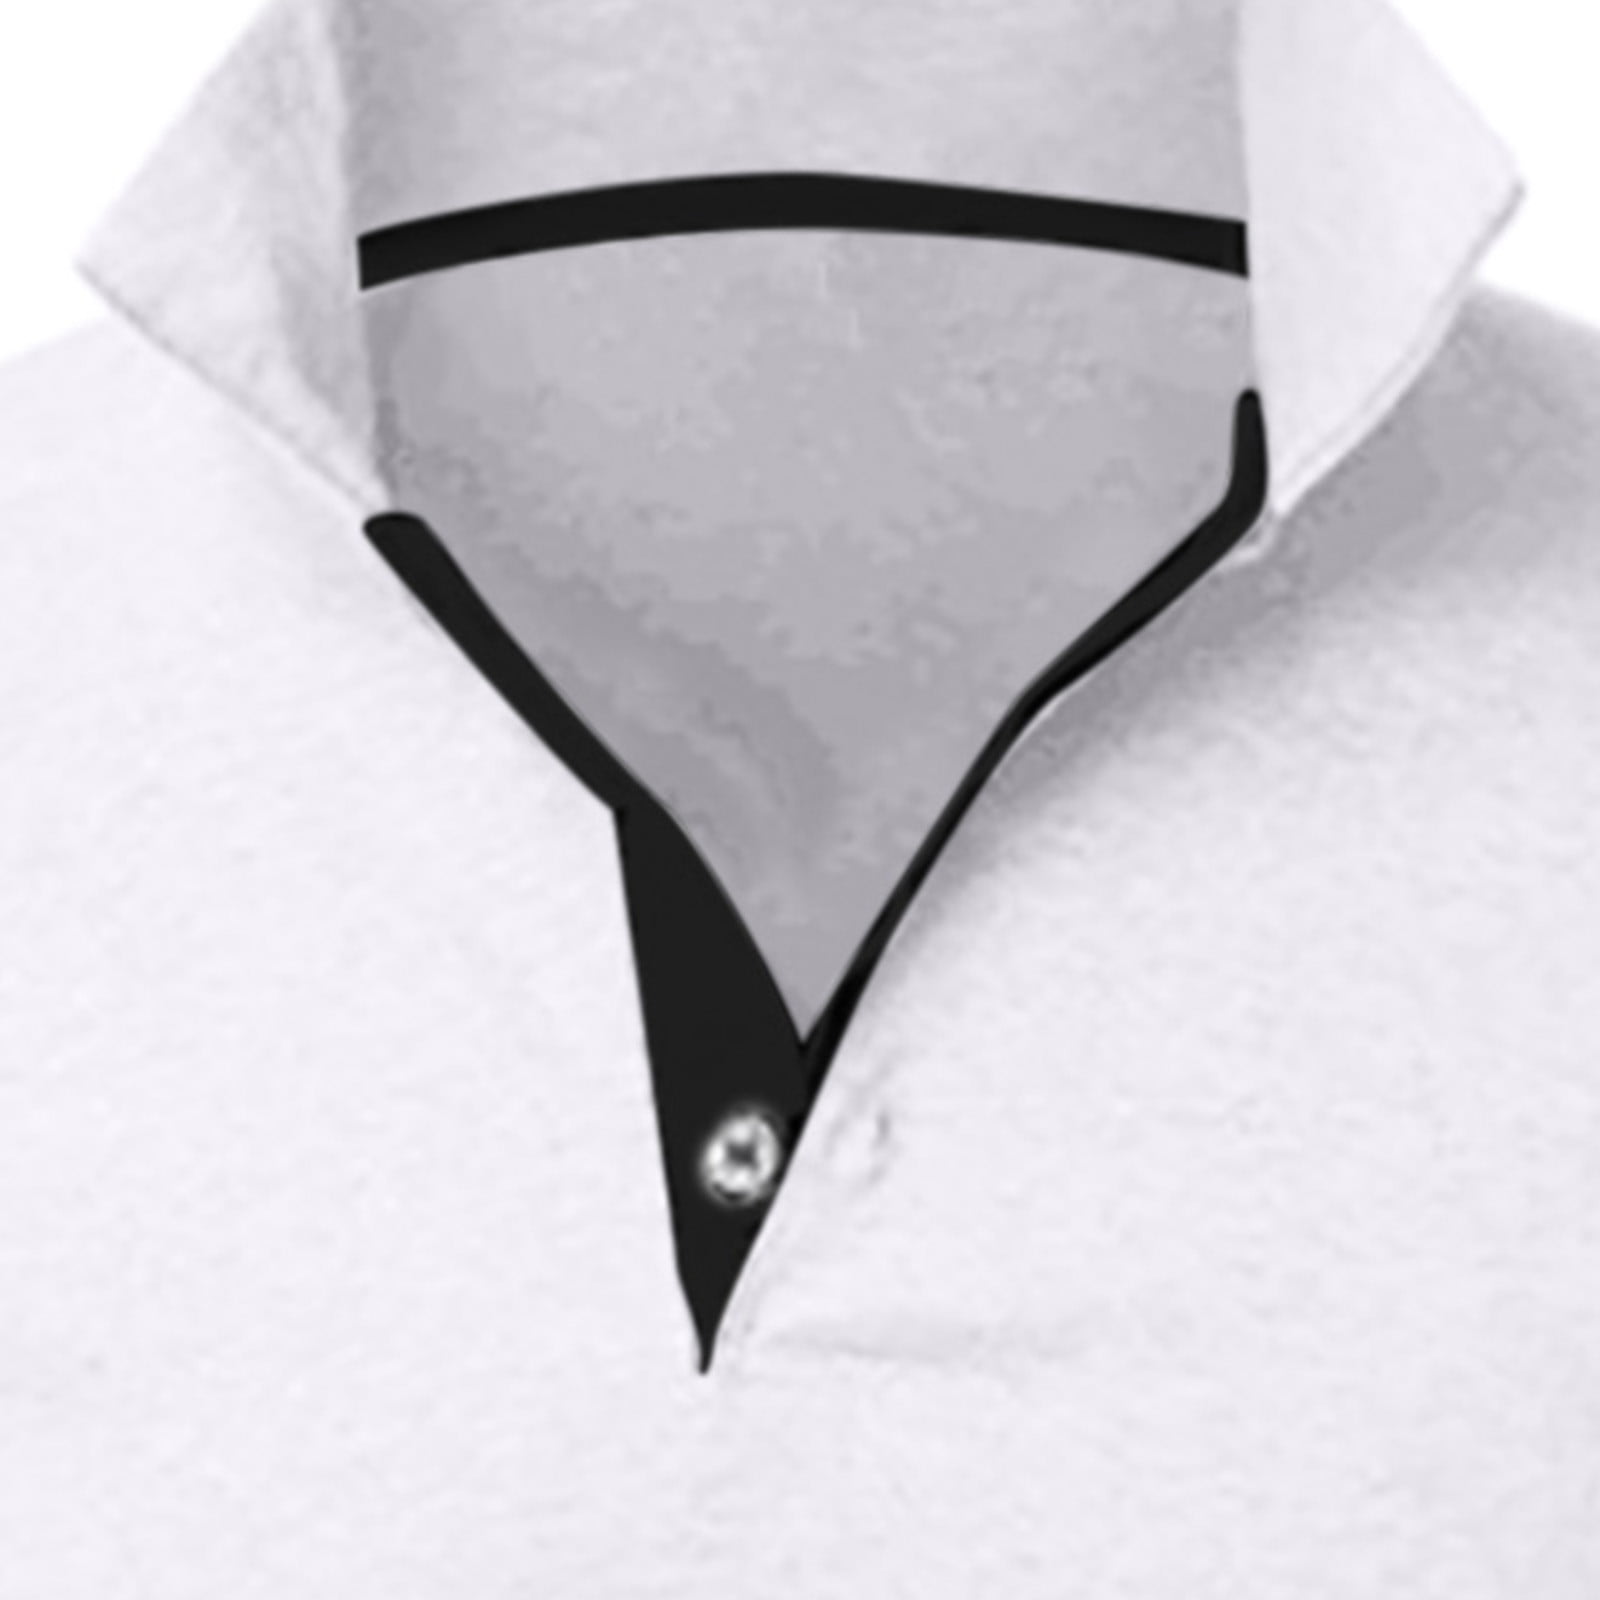 Shirts For Men White T Shirts for Men Fashion Men's Collar Top Stand Collar  Shortsleeve Button Matching Summer Casual Muscle Shirts For Men,White,M 